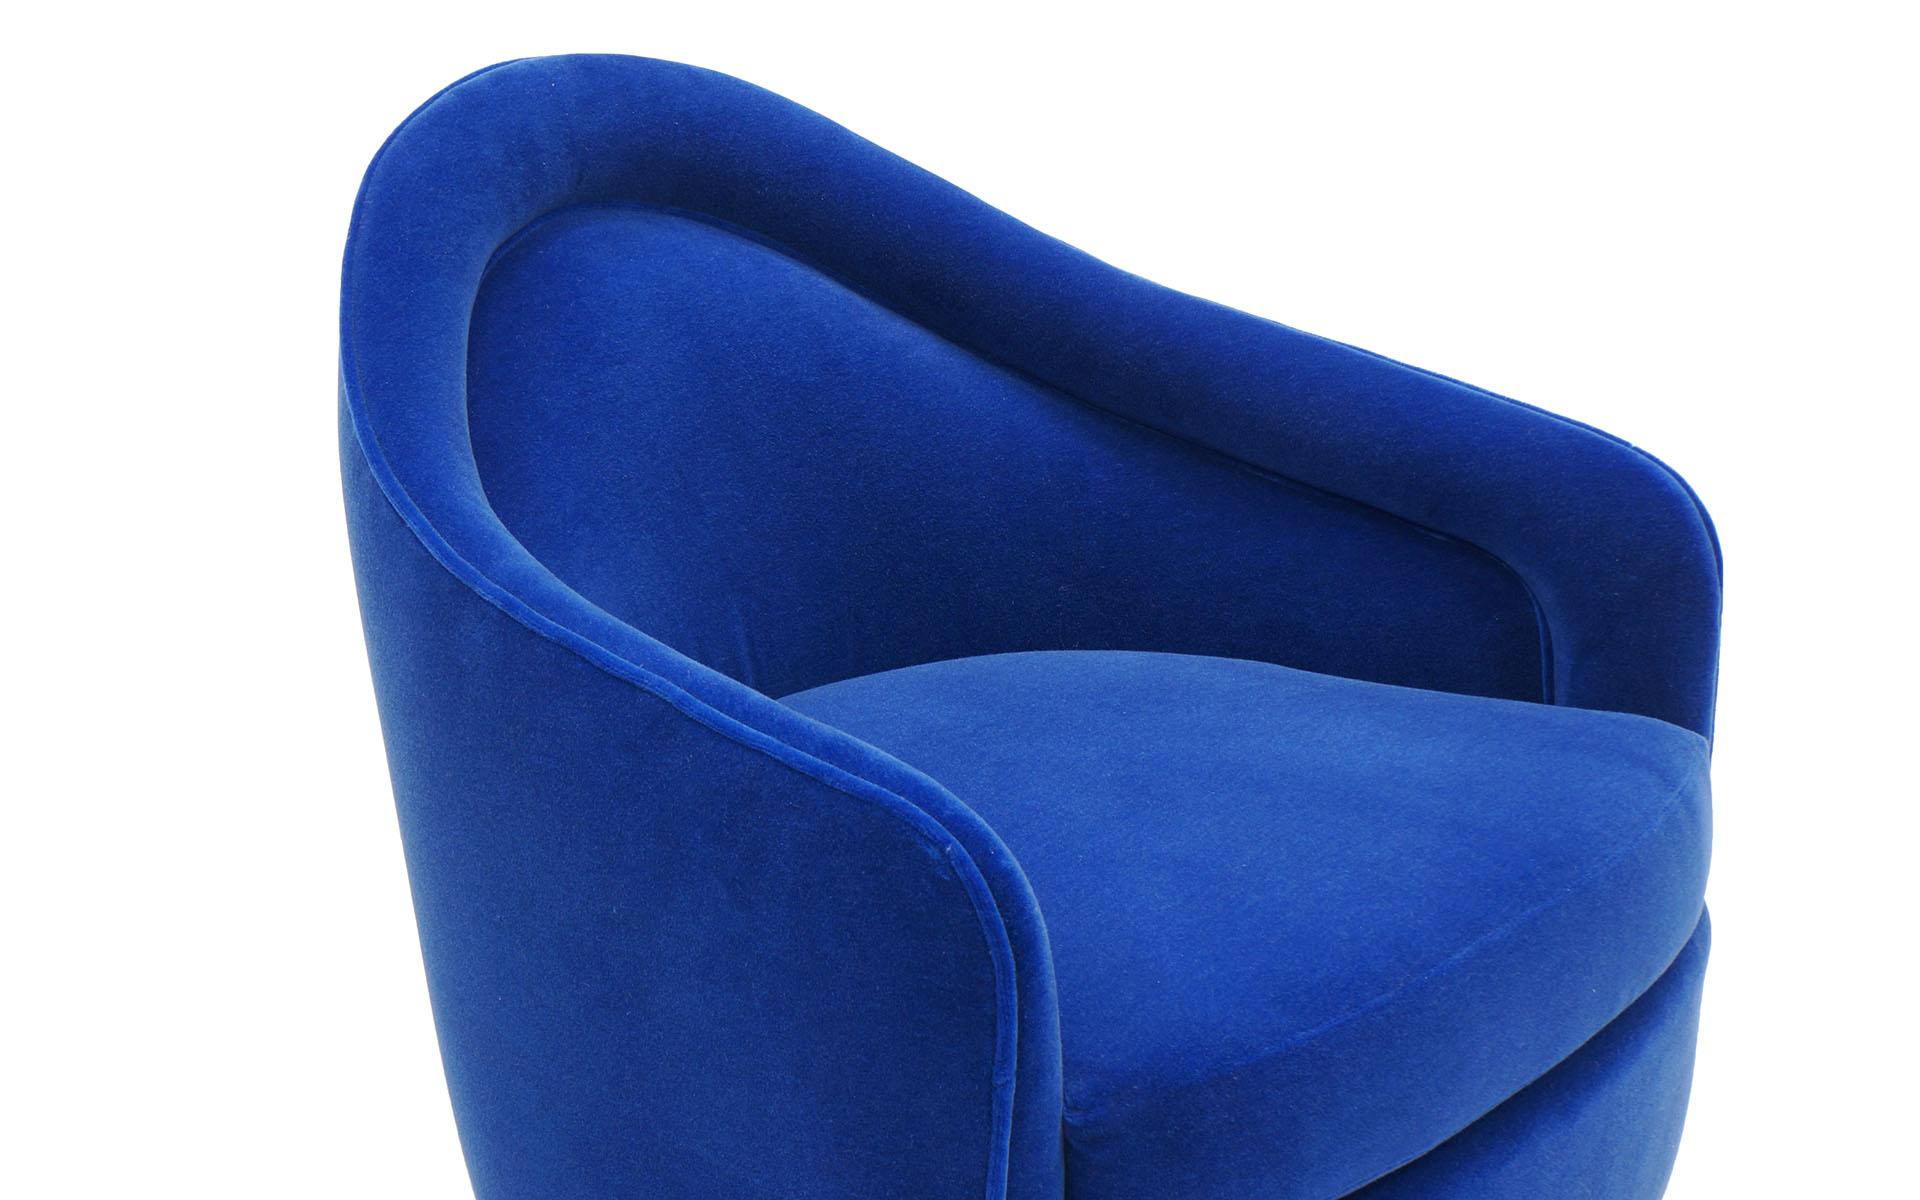 Late 20th Century Pair of Tilt Swivel Club Chairs in Blue Mohair by Milo Baughman, Exceptional Set